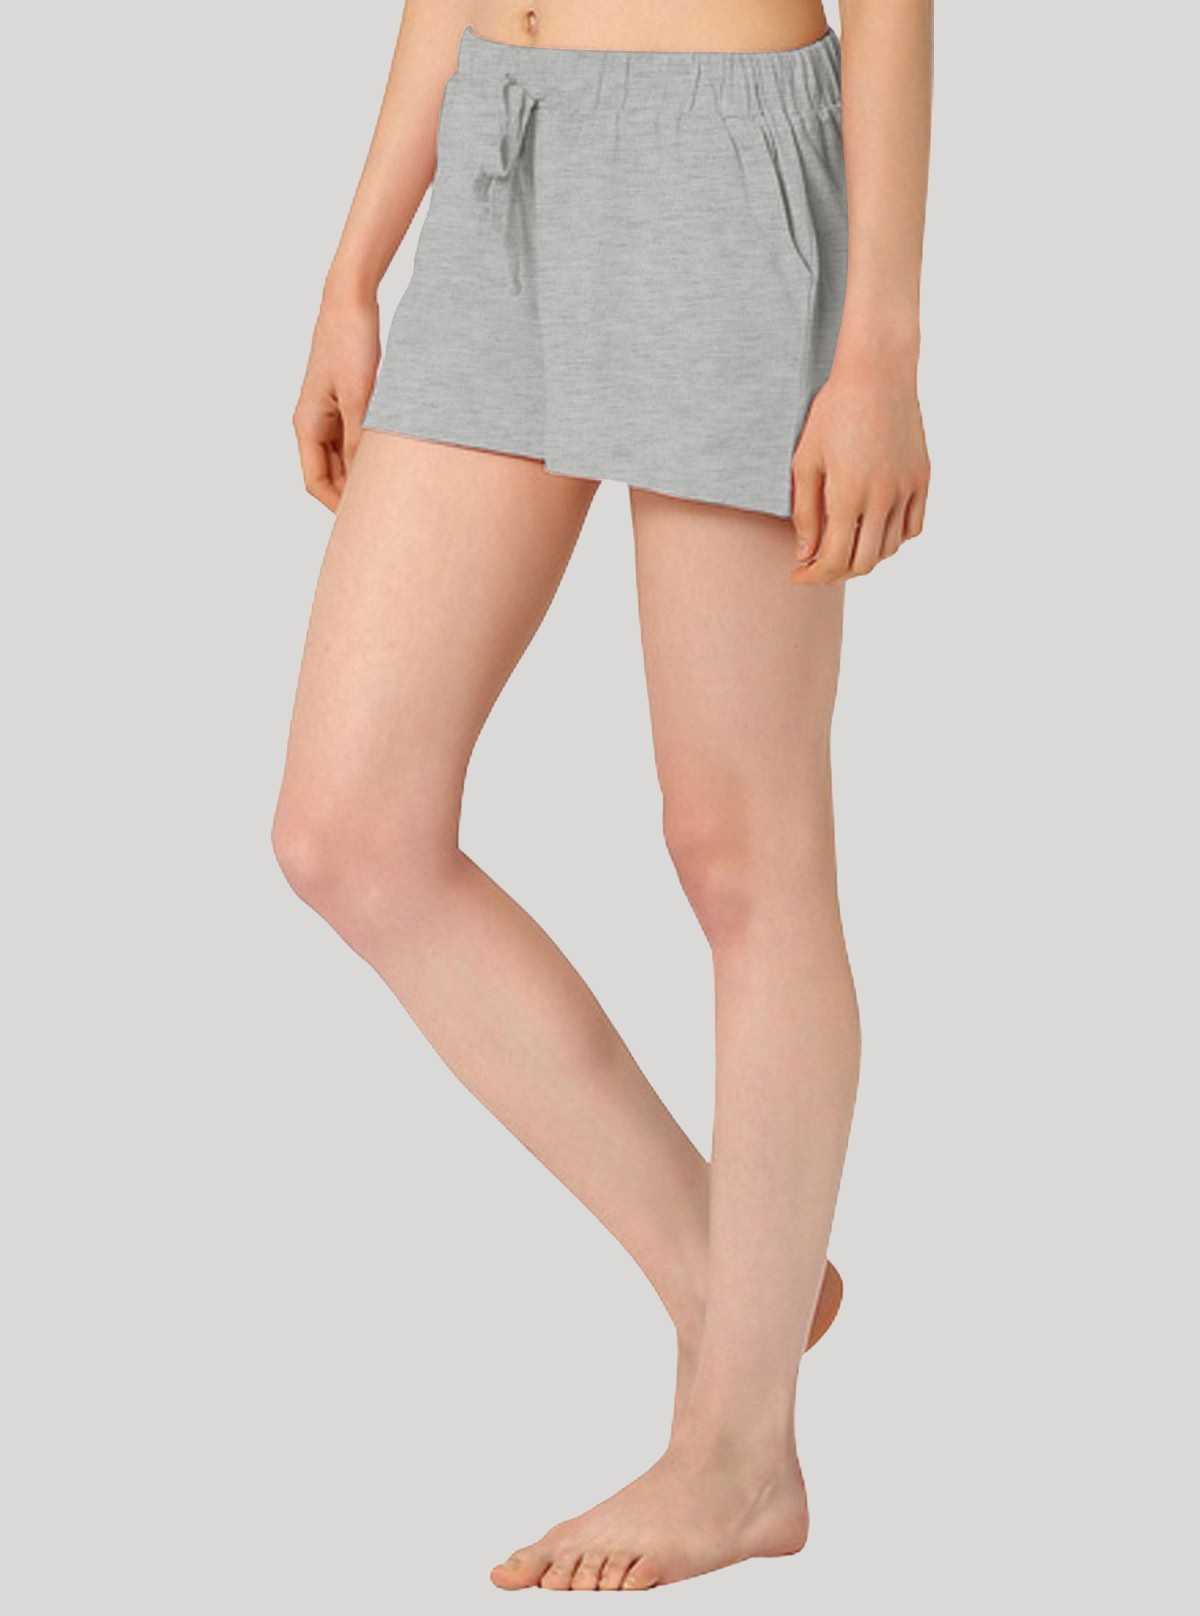 Grey Melange Womens Shorts Boer and Fitch - 2